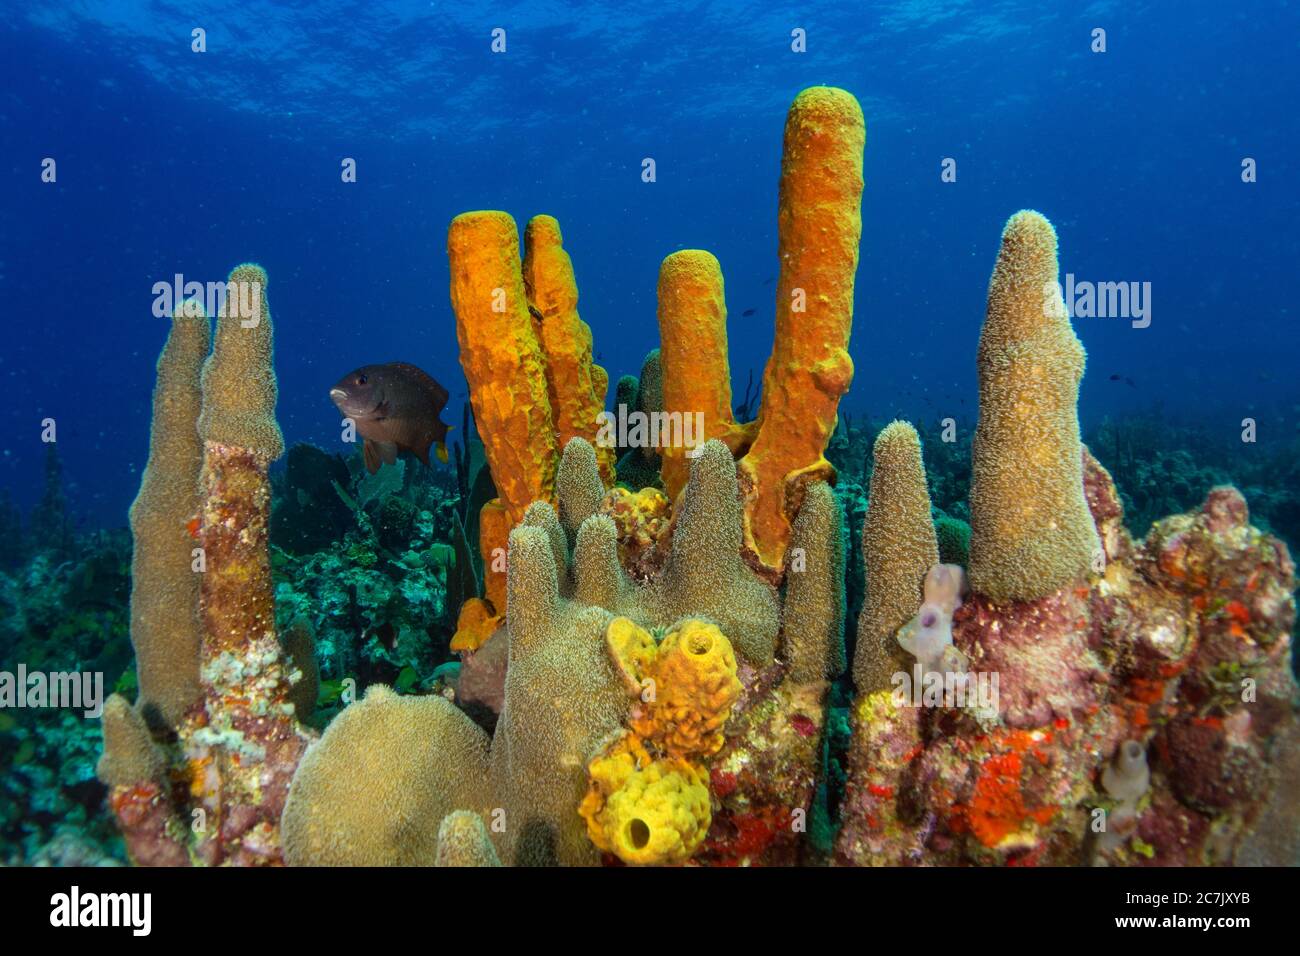 Colorful corals, sponges and sea fans in caribbean sea with sun backlight in blue ocean Stock Photo